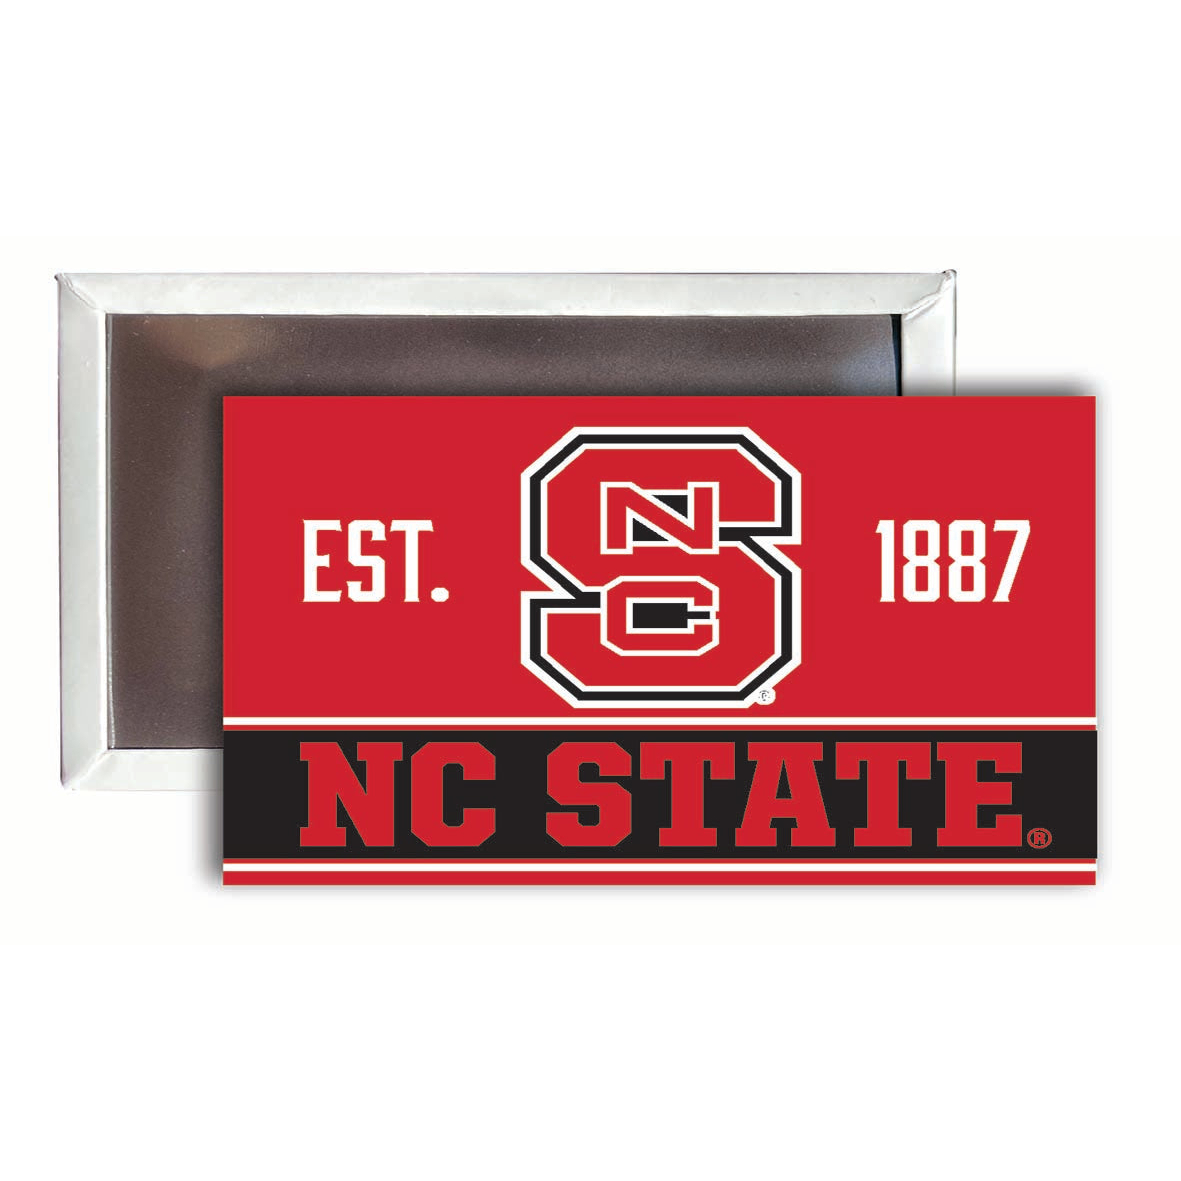 NC State Wolfpack 2x3-Inch Fridge Magnet 4-Pack